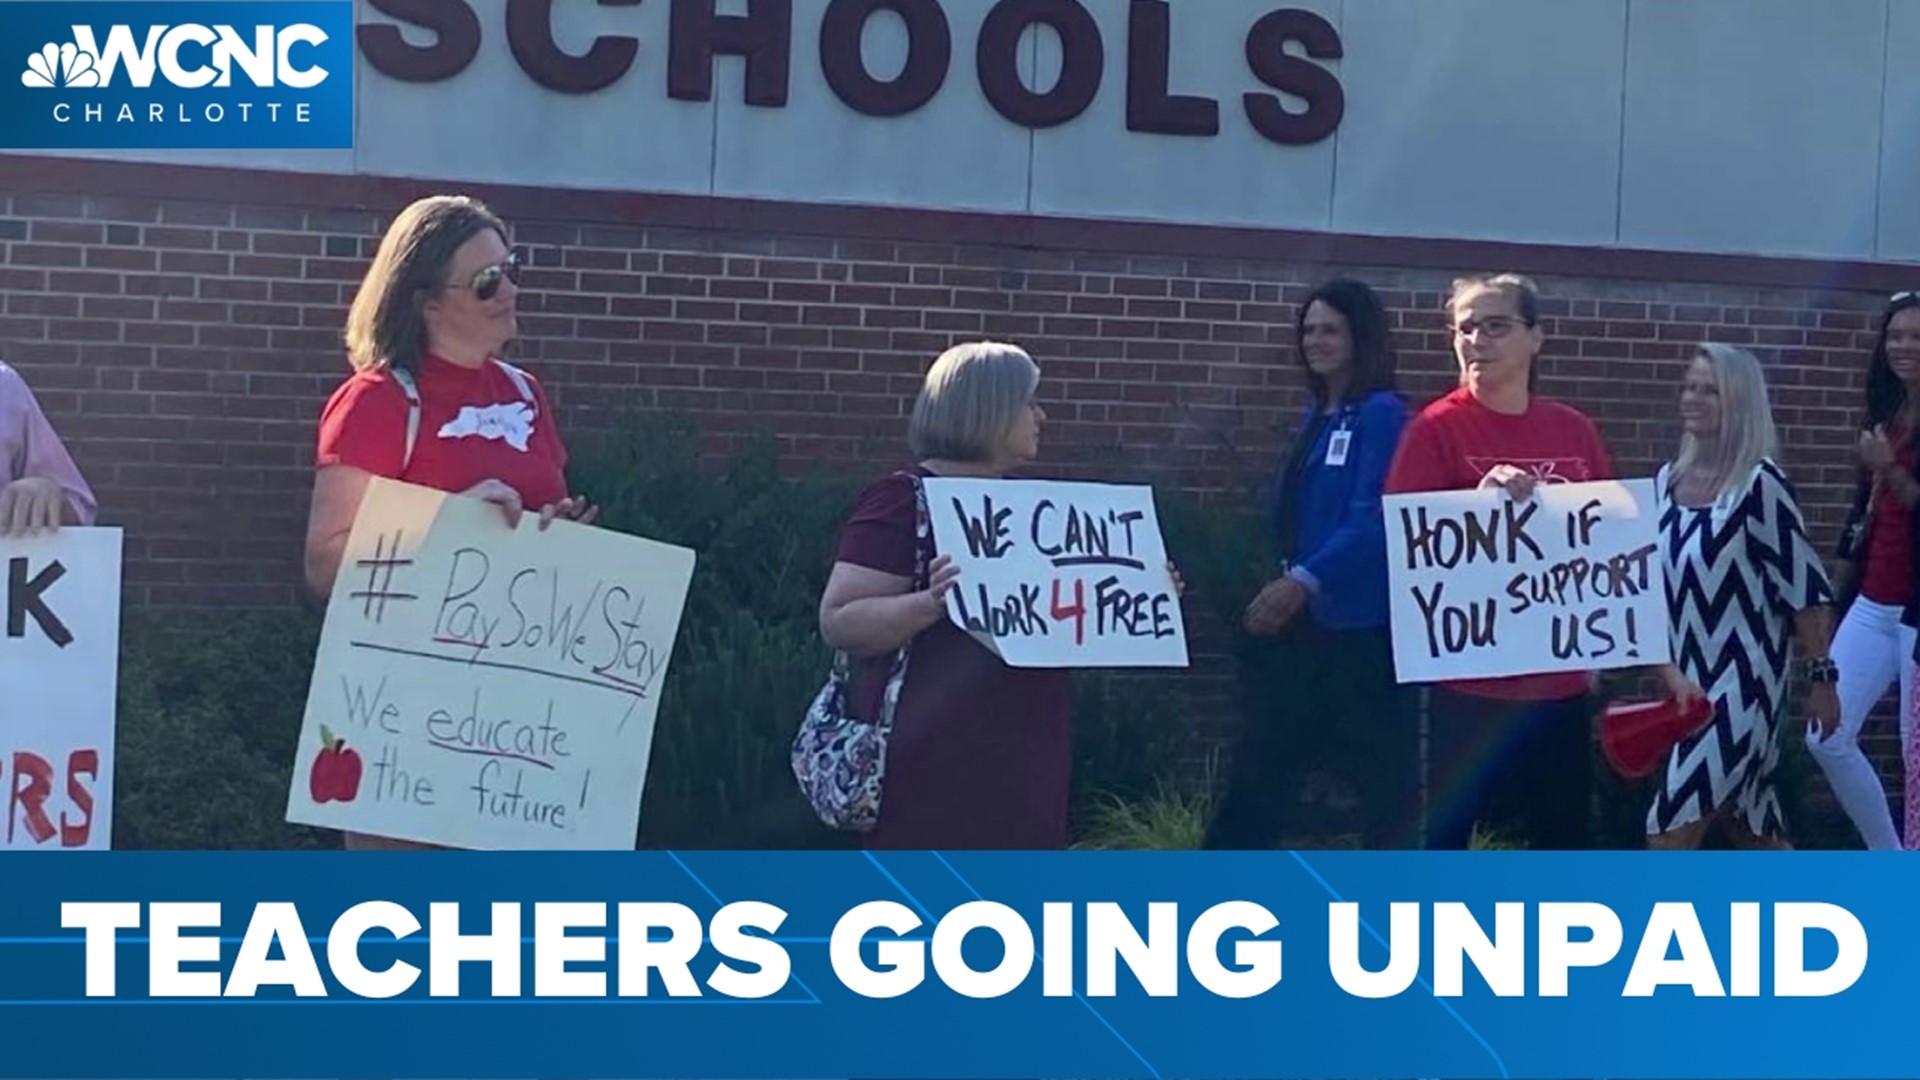 Gaston County school employees continue to suffer payroll problems after the district switched systems against a recommendation from North Carolina.